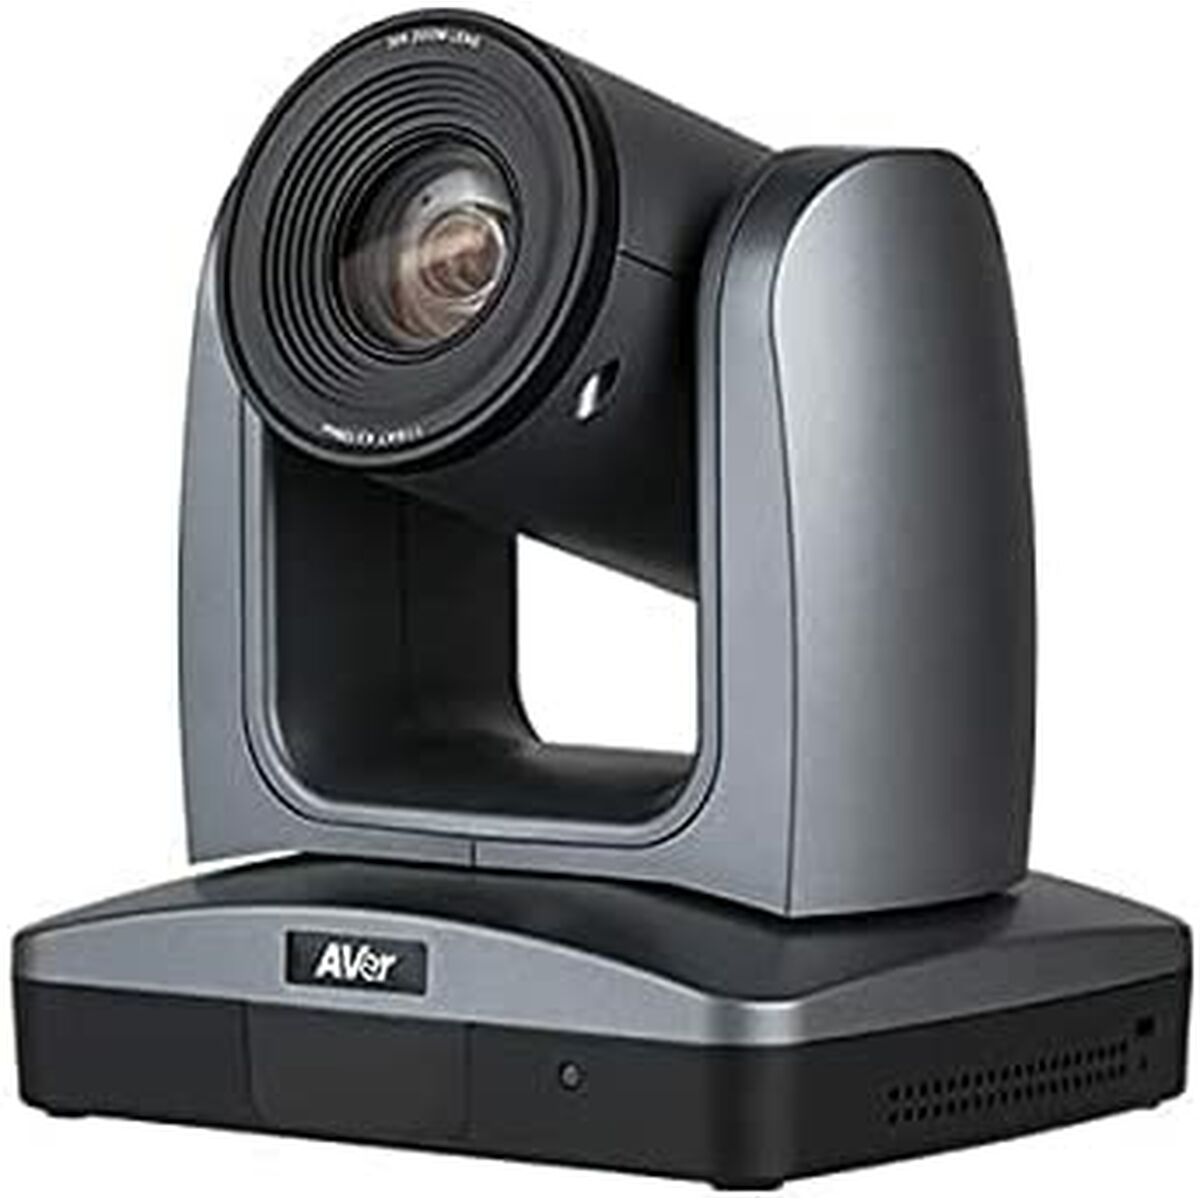 Webcam AVer PTZ330N 30XZOOM 3GSDI, AVer, Computing, Accessories, webcam-aver-ptz330n-30xzoom-3gsdi, :Video Conferencing, :Webcam, Brand_AVer, category-reference-2609, category-reference-2642, category-reference-2844, category-reference-t-19685, category-reference-t-19908, category-reference-t-21340, computers / peripherals, Condition_NEW, office, Price_+ 1000, Teleworking, RiotNook